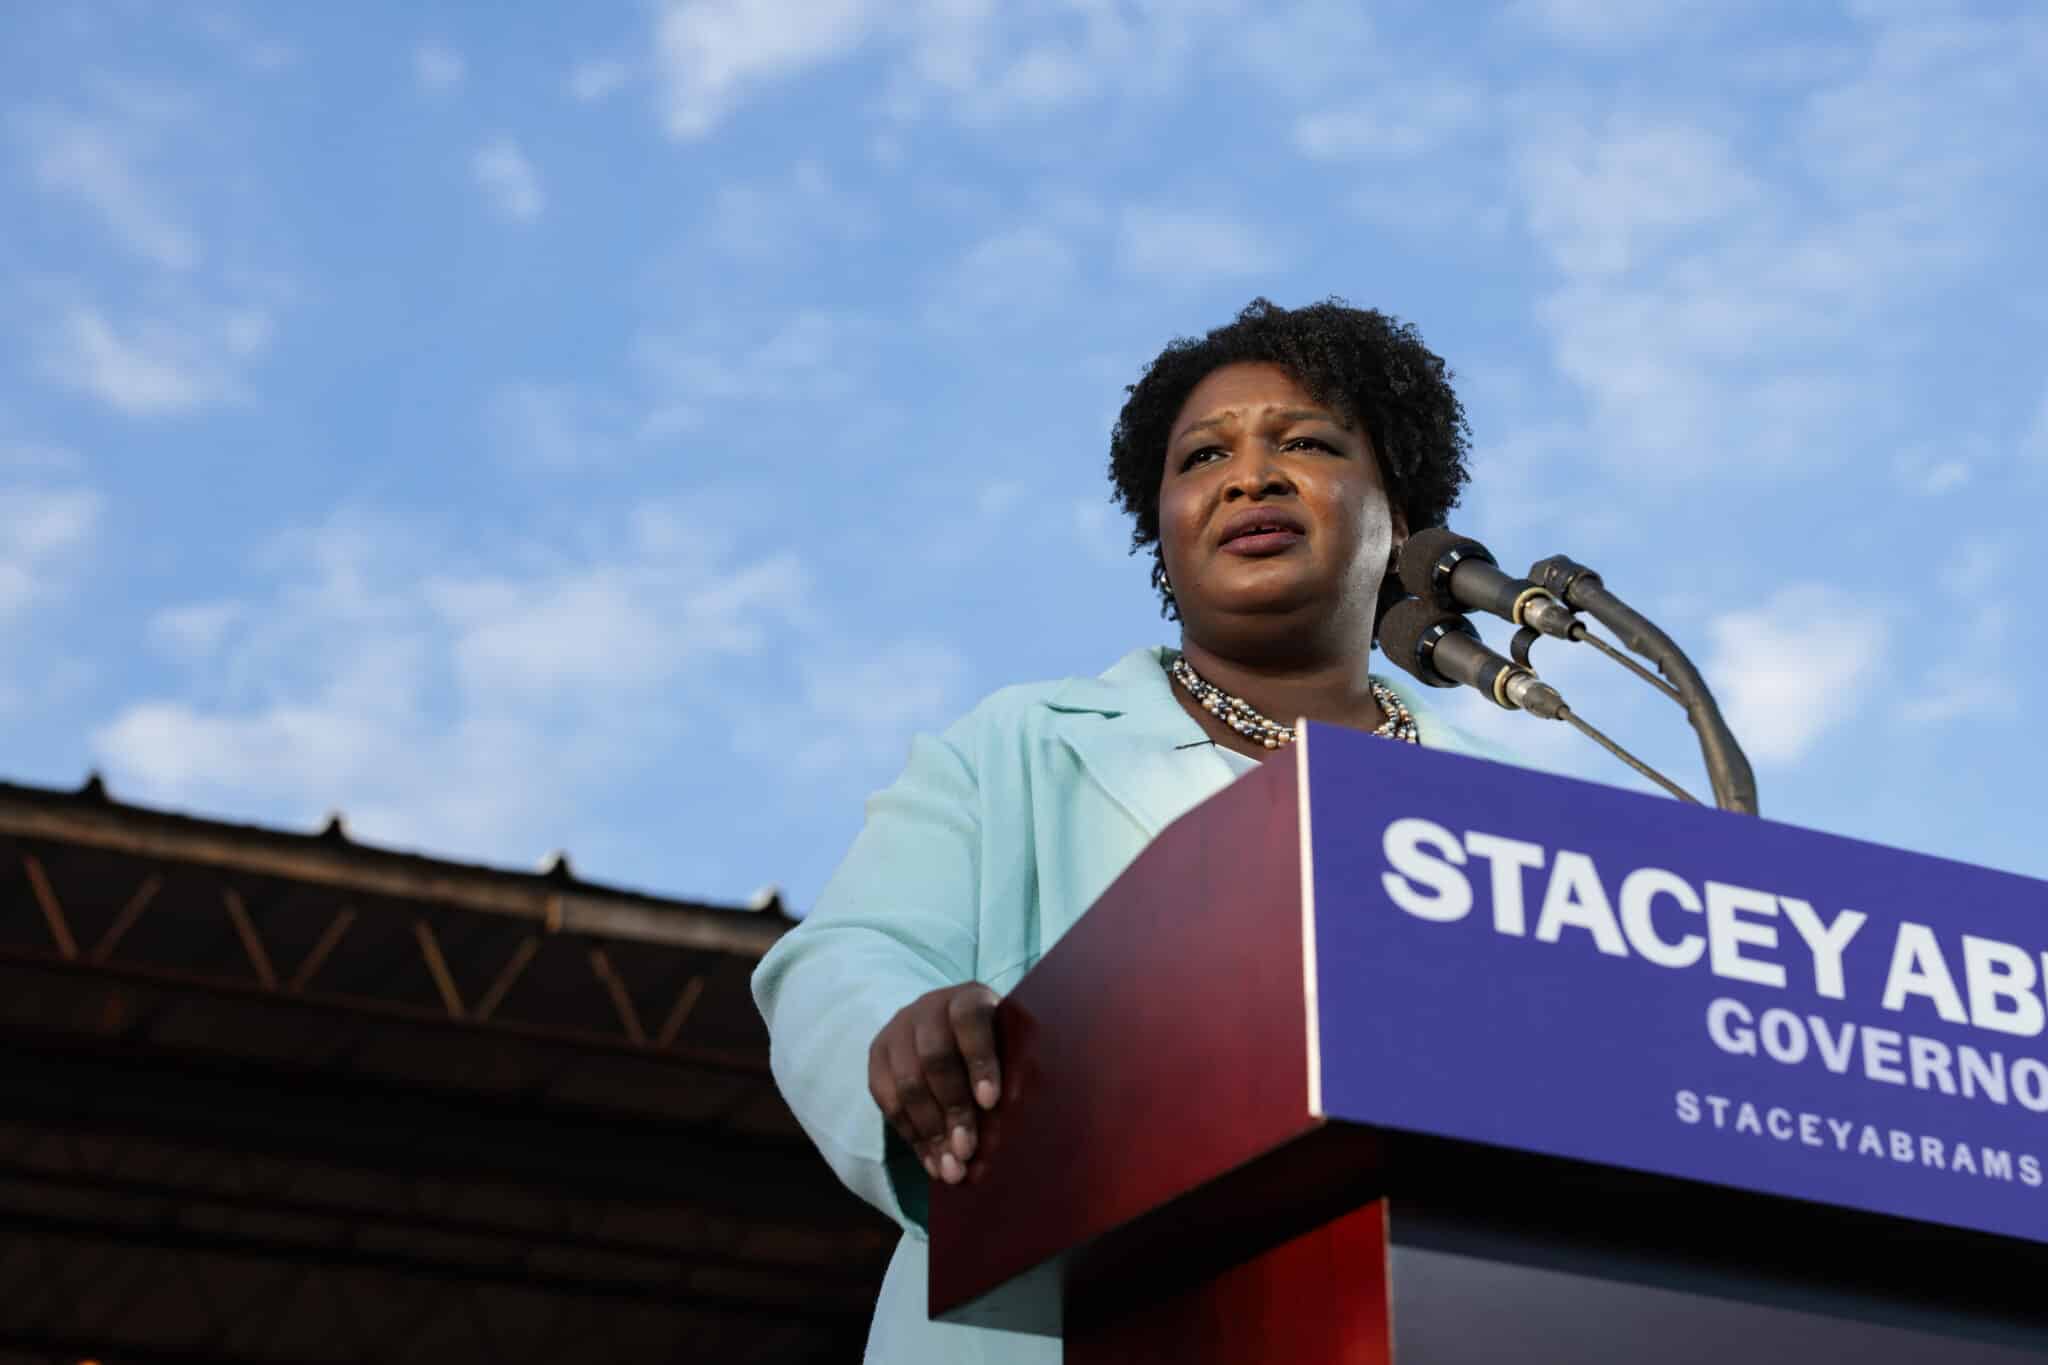 ATLANTA, GEORGIA - MARCH 14: Georgia gubernatorial Democratic candidate Stacey Abrams speaks during a campaign rally on March 14, 2022 in Atlanta, Georgia. Abrams is on a weeklong tour of cities in Georgia after qualifying last week to run again for governor and currently has no opponent for the Democratic nomination.  (Photo by Anna Moneymaker/Getty Images)